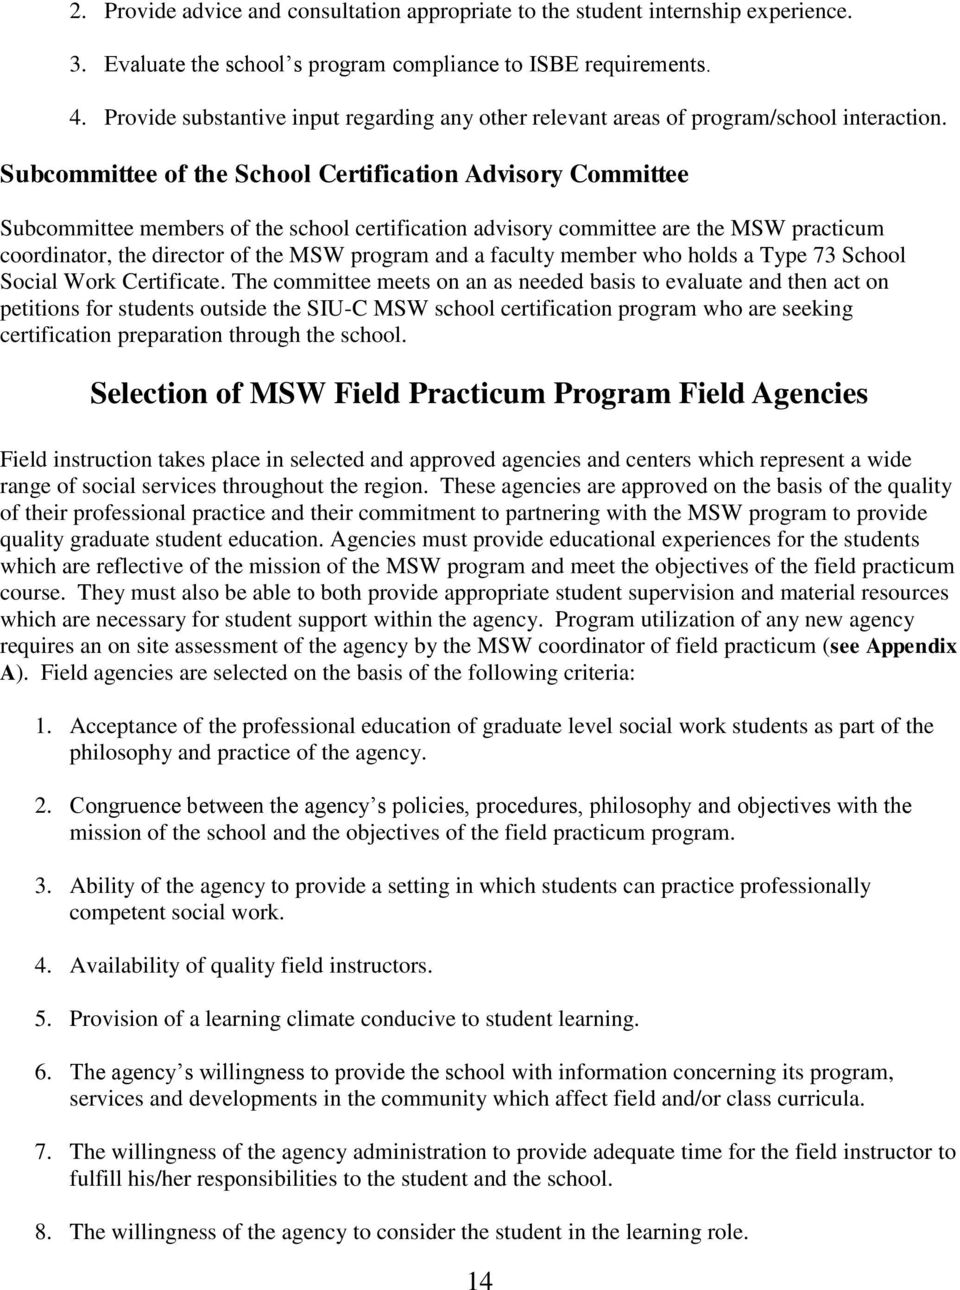 Subcommittee of the School Certification Advisory Committee Subcommittee members of the school certification advisory committee are the MSW practicum coordinator, the director of the MSW program and